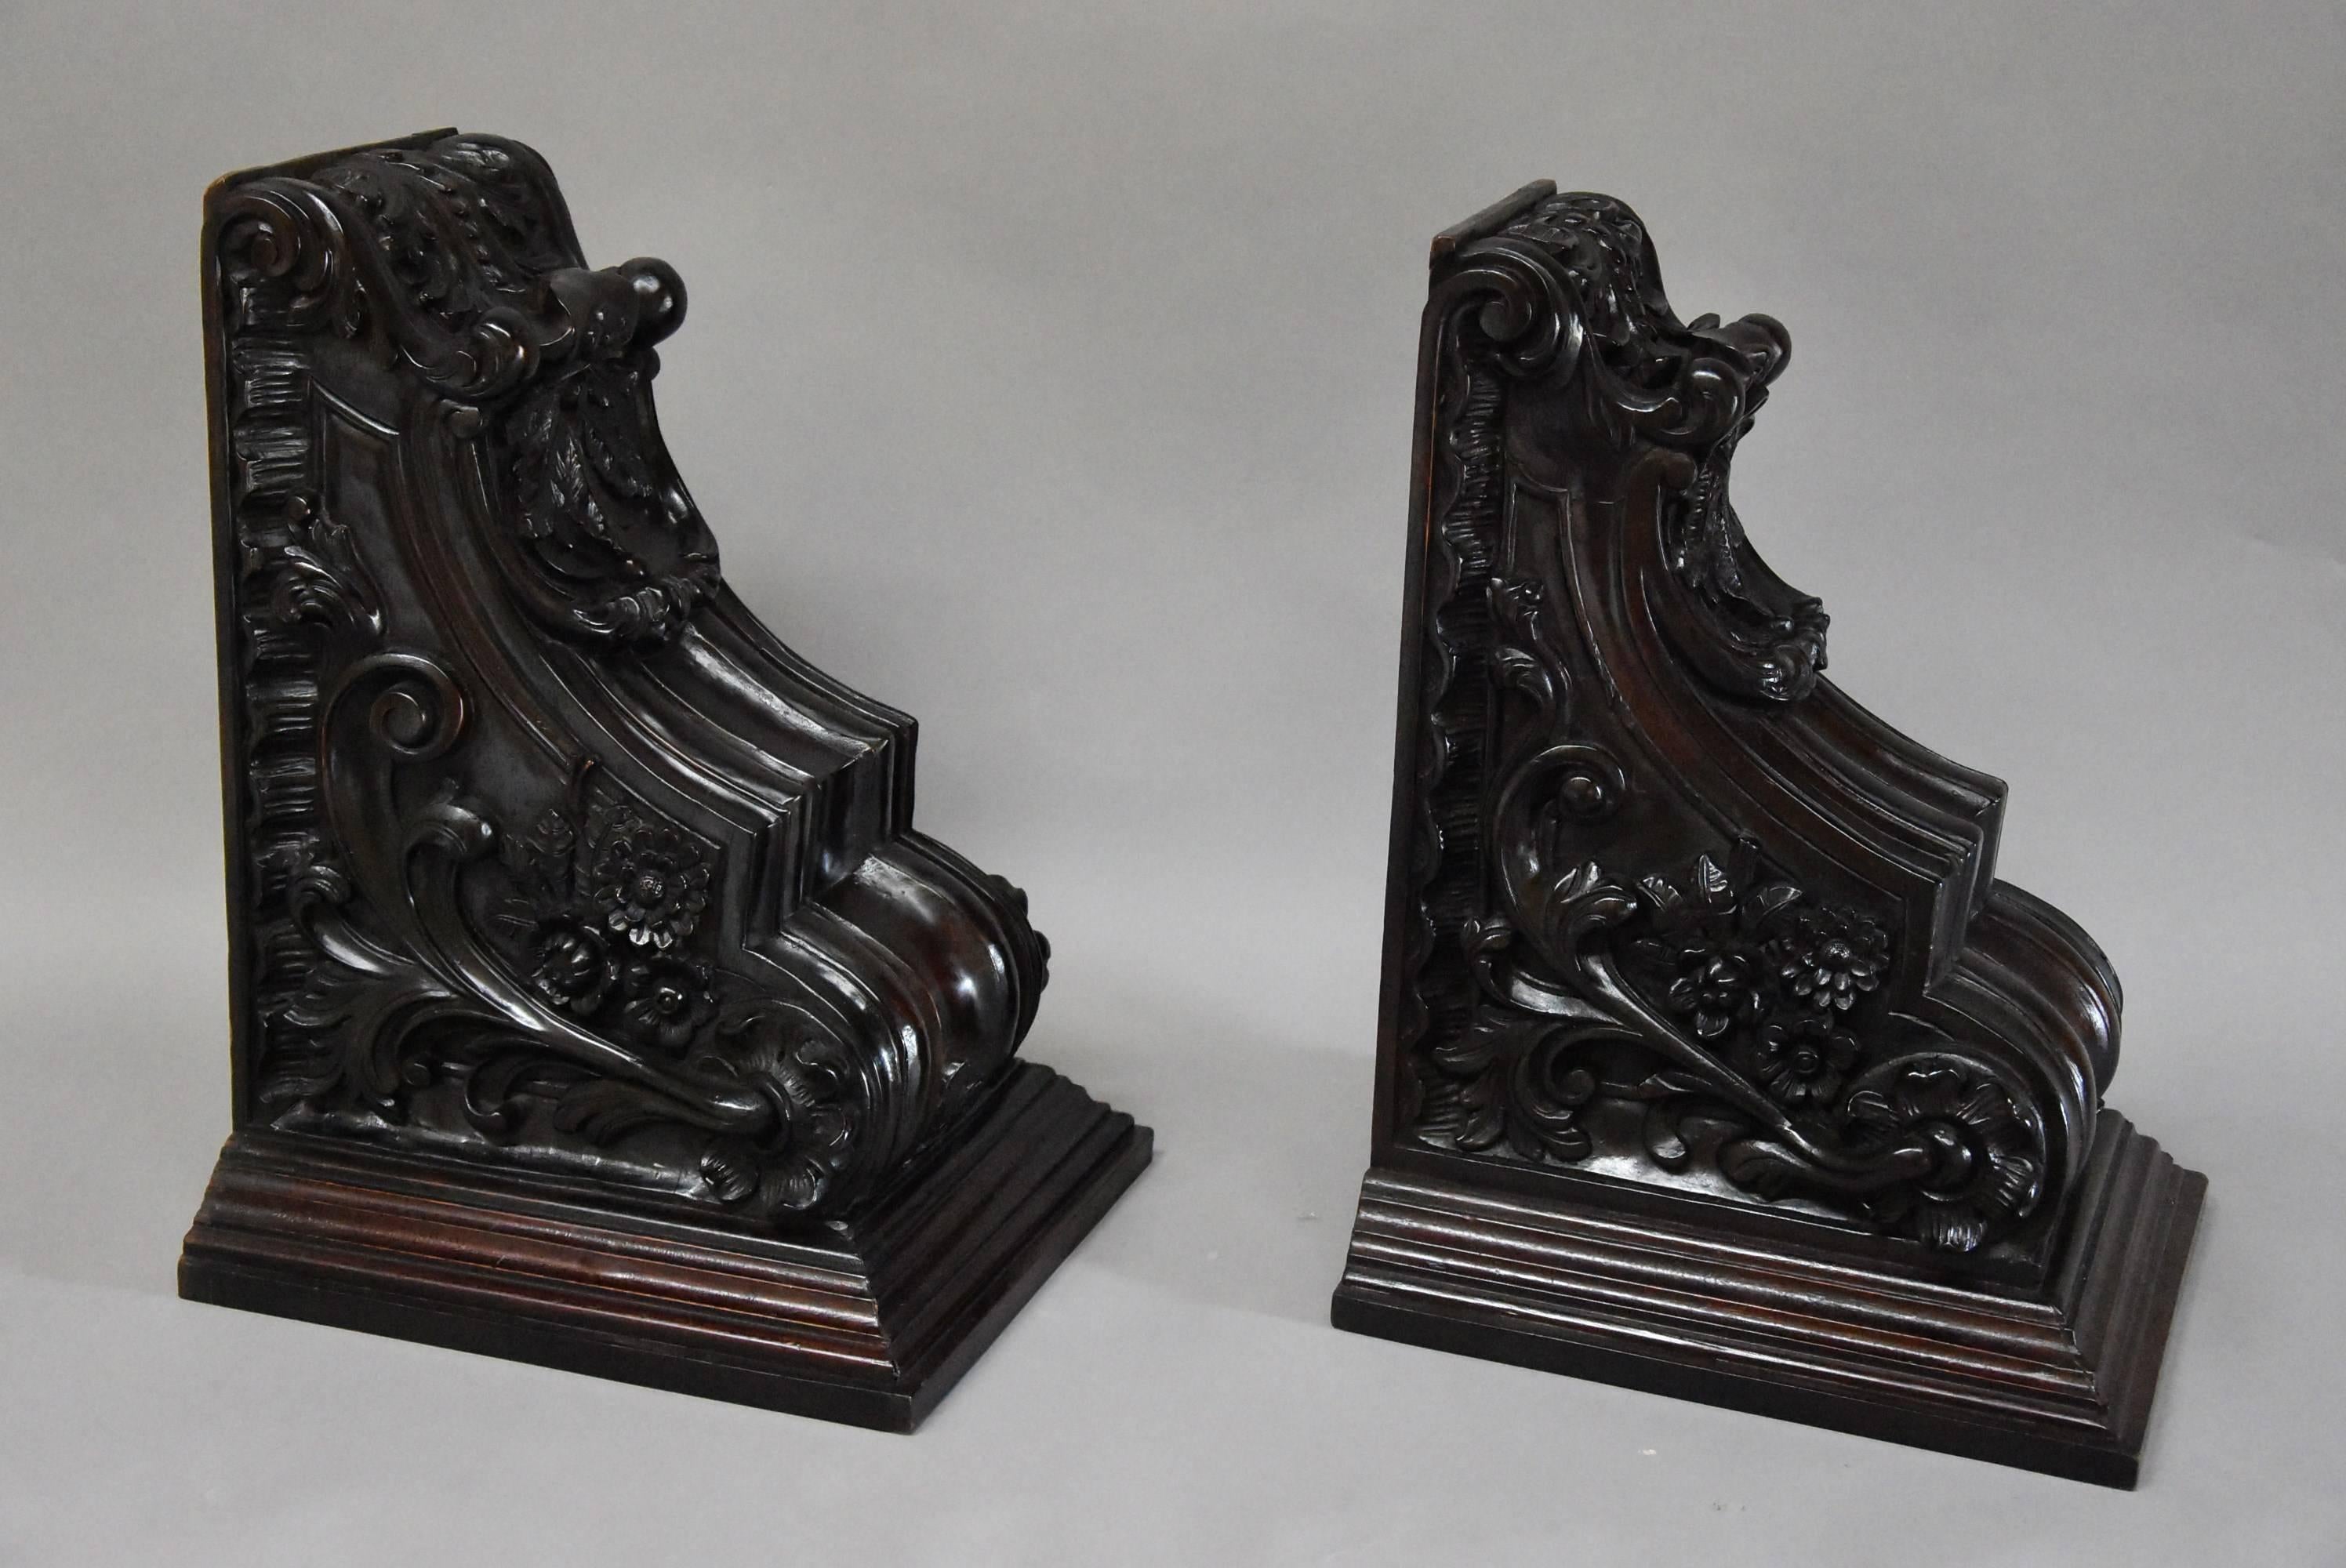 English Large Pair of 19th Century Decorative Carved Mahogany Architectural Brackets